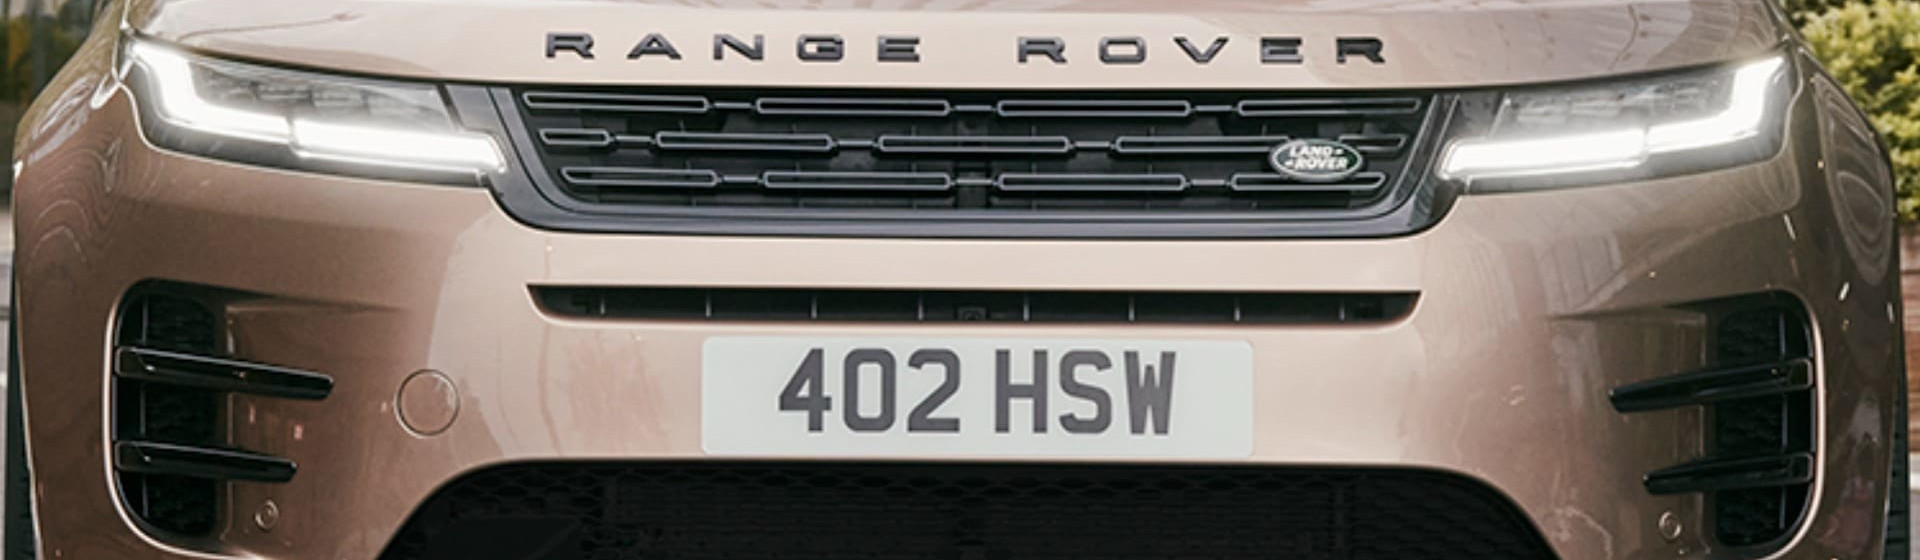 Range Rover Front Grille